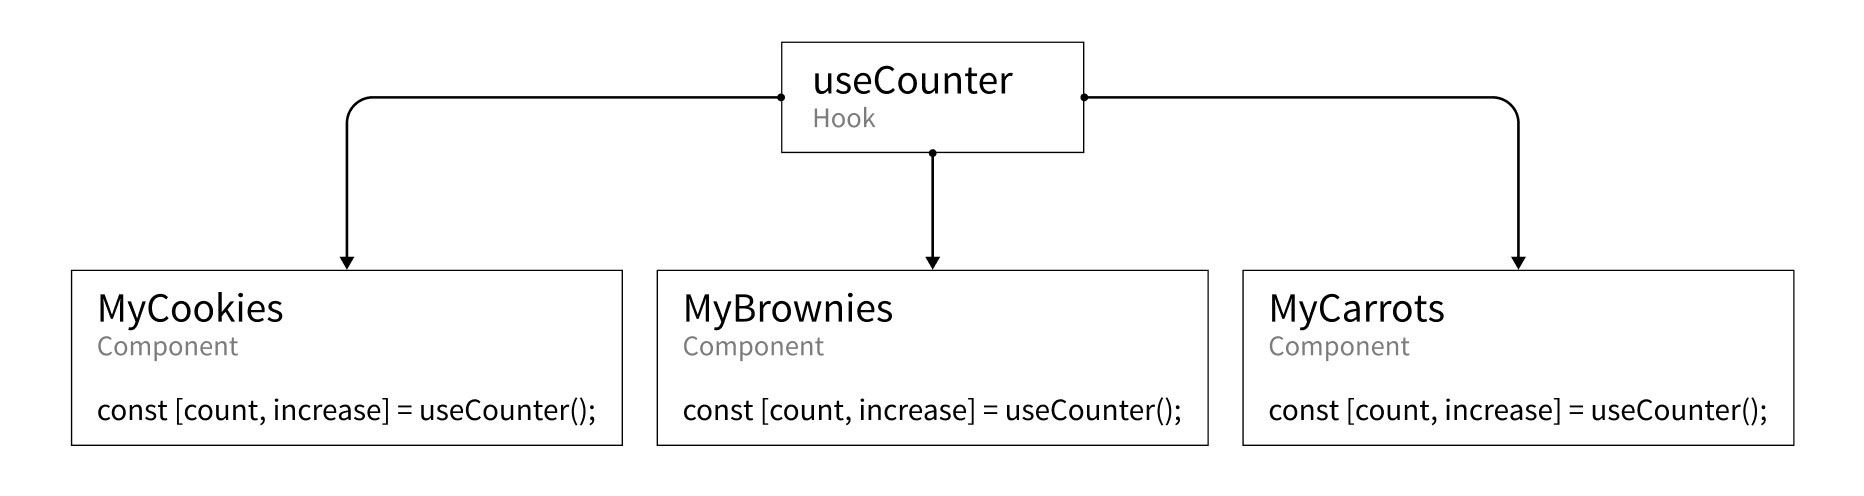 hook-example-use-counter-1